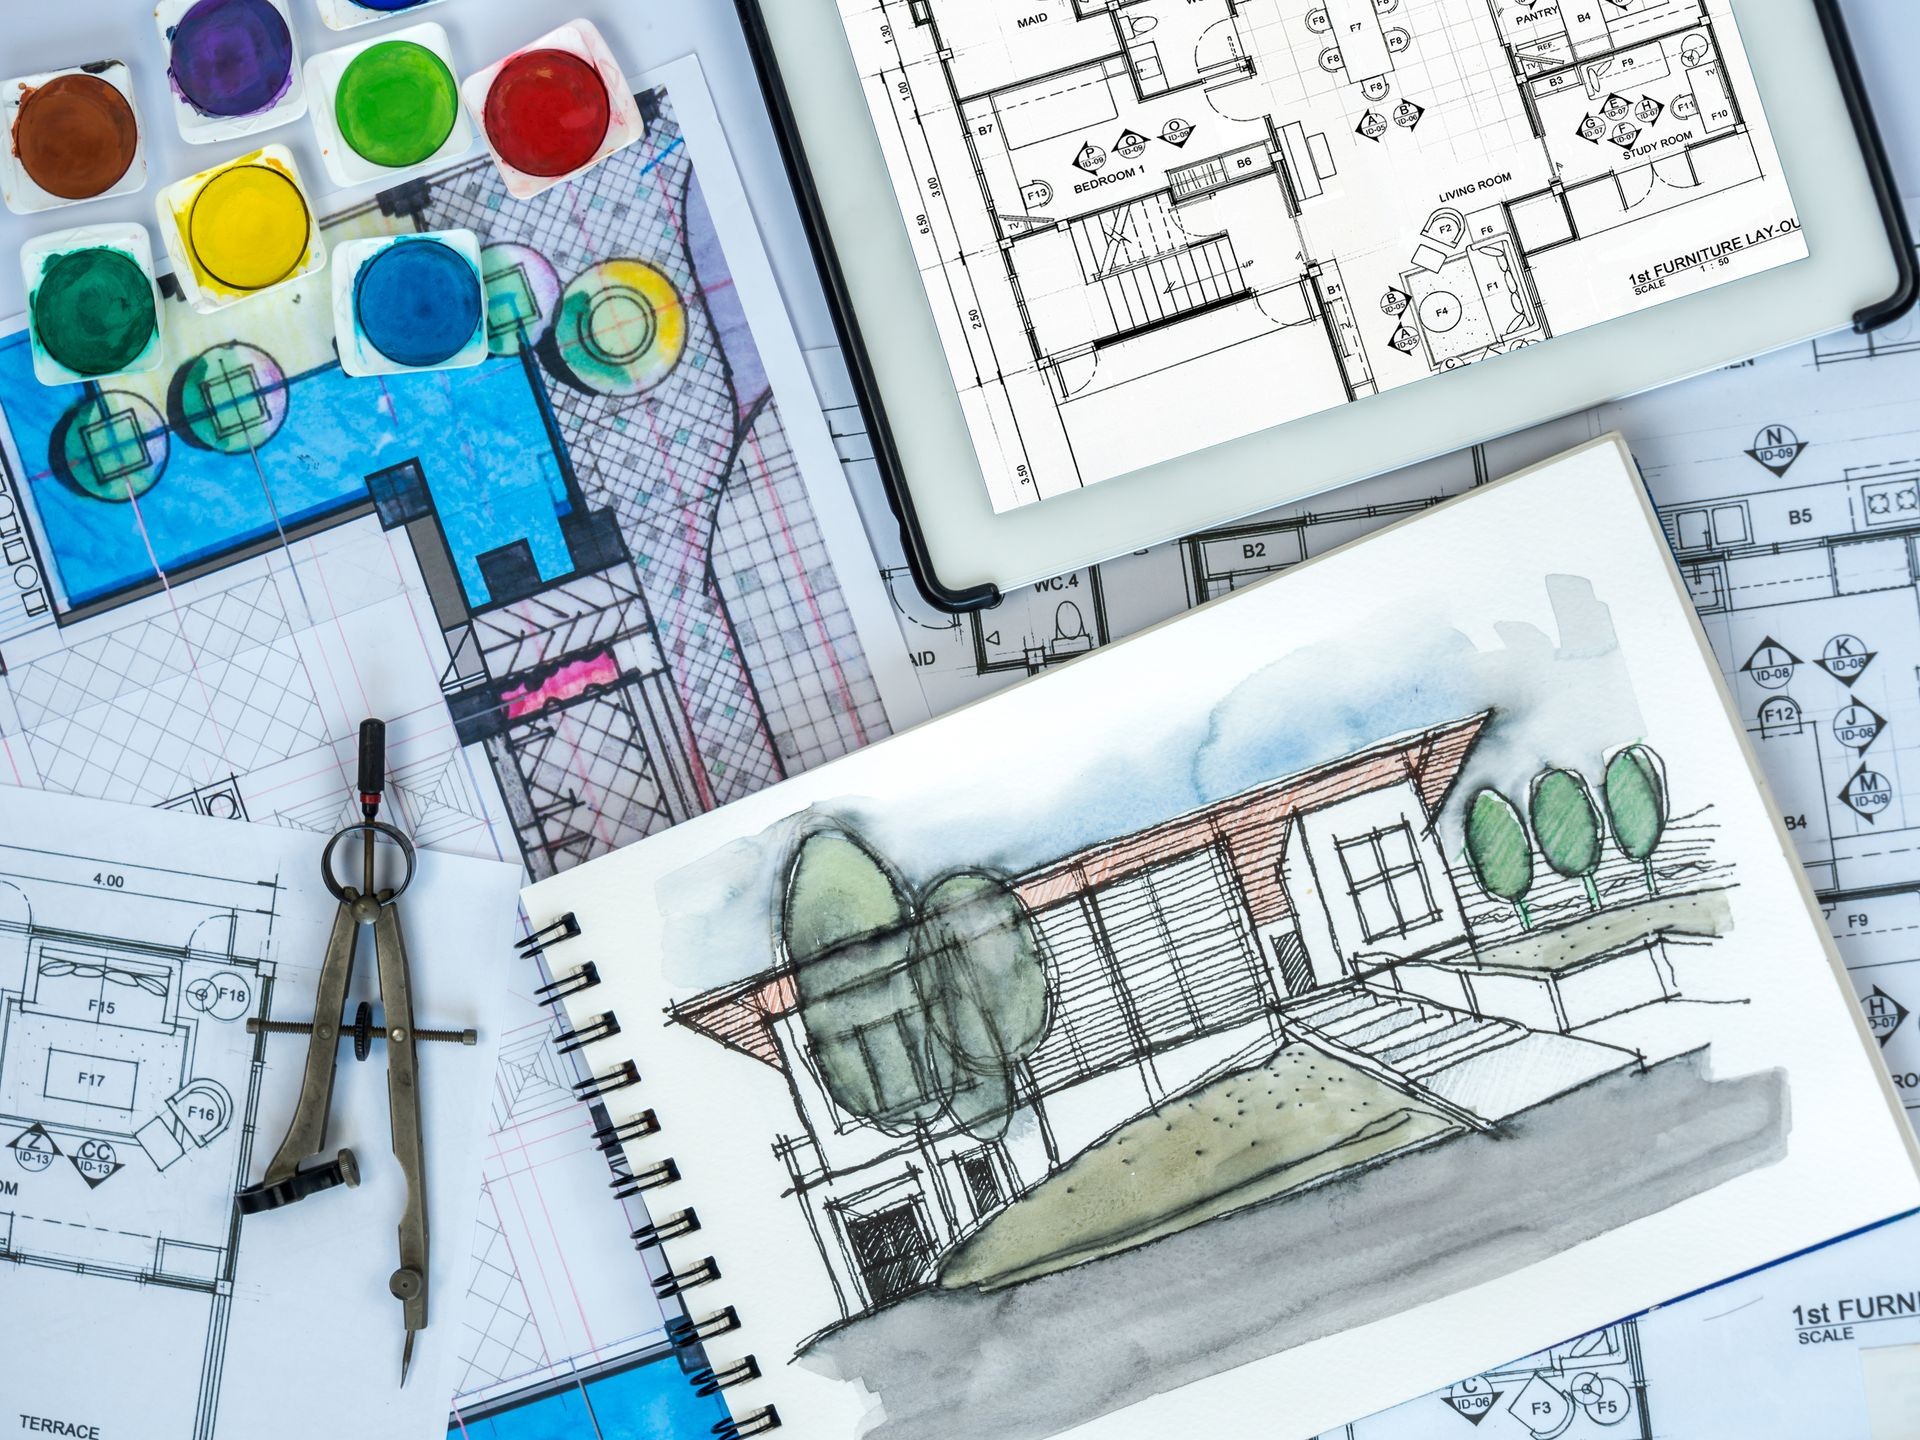 Top view of architect, interior designer worktable with tablet computer, perspective view sketch & blue print  / Real estate business & renovation  conceptual